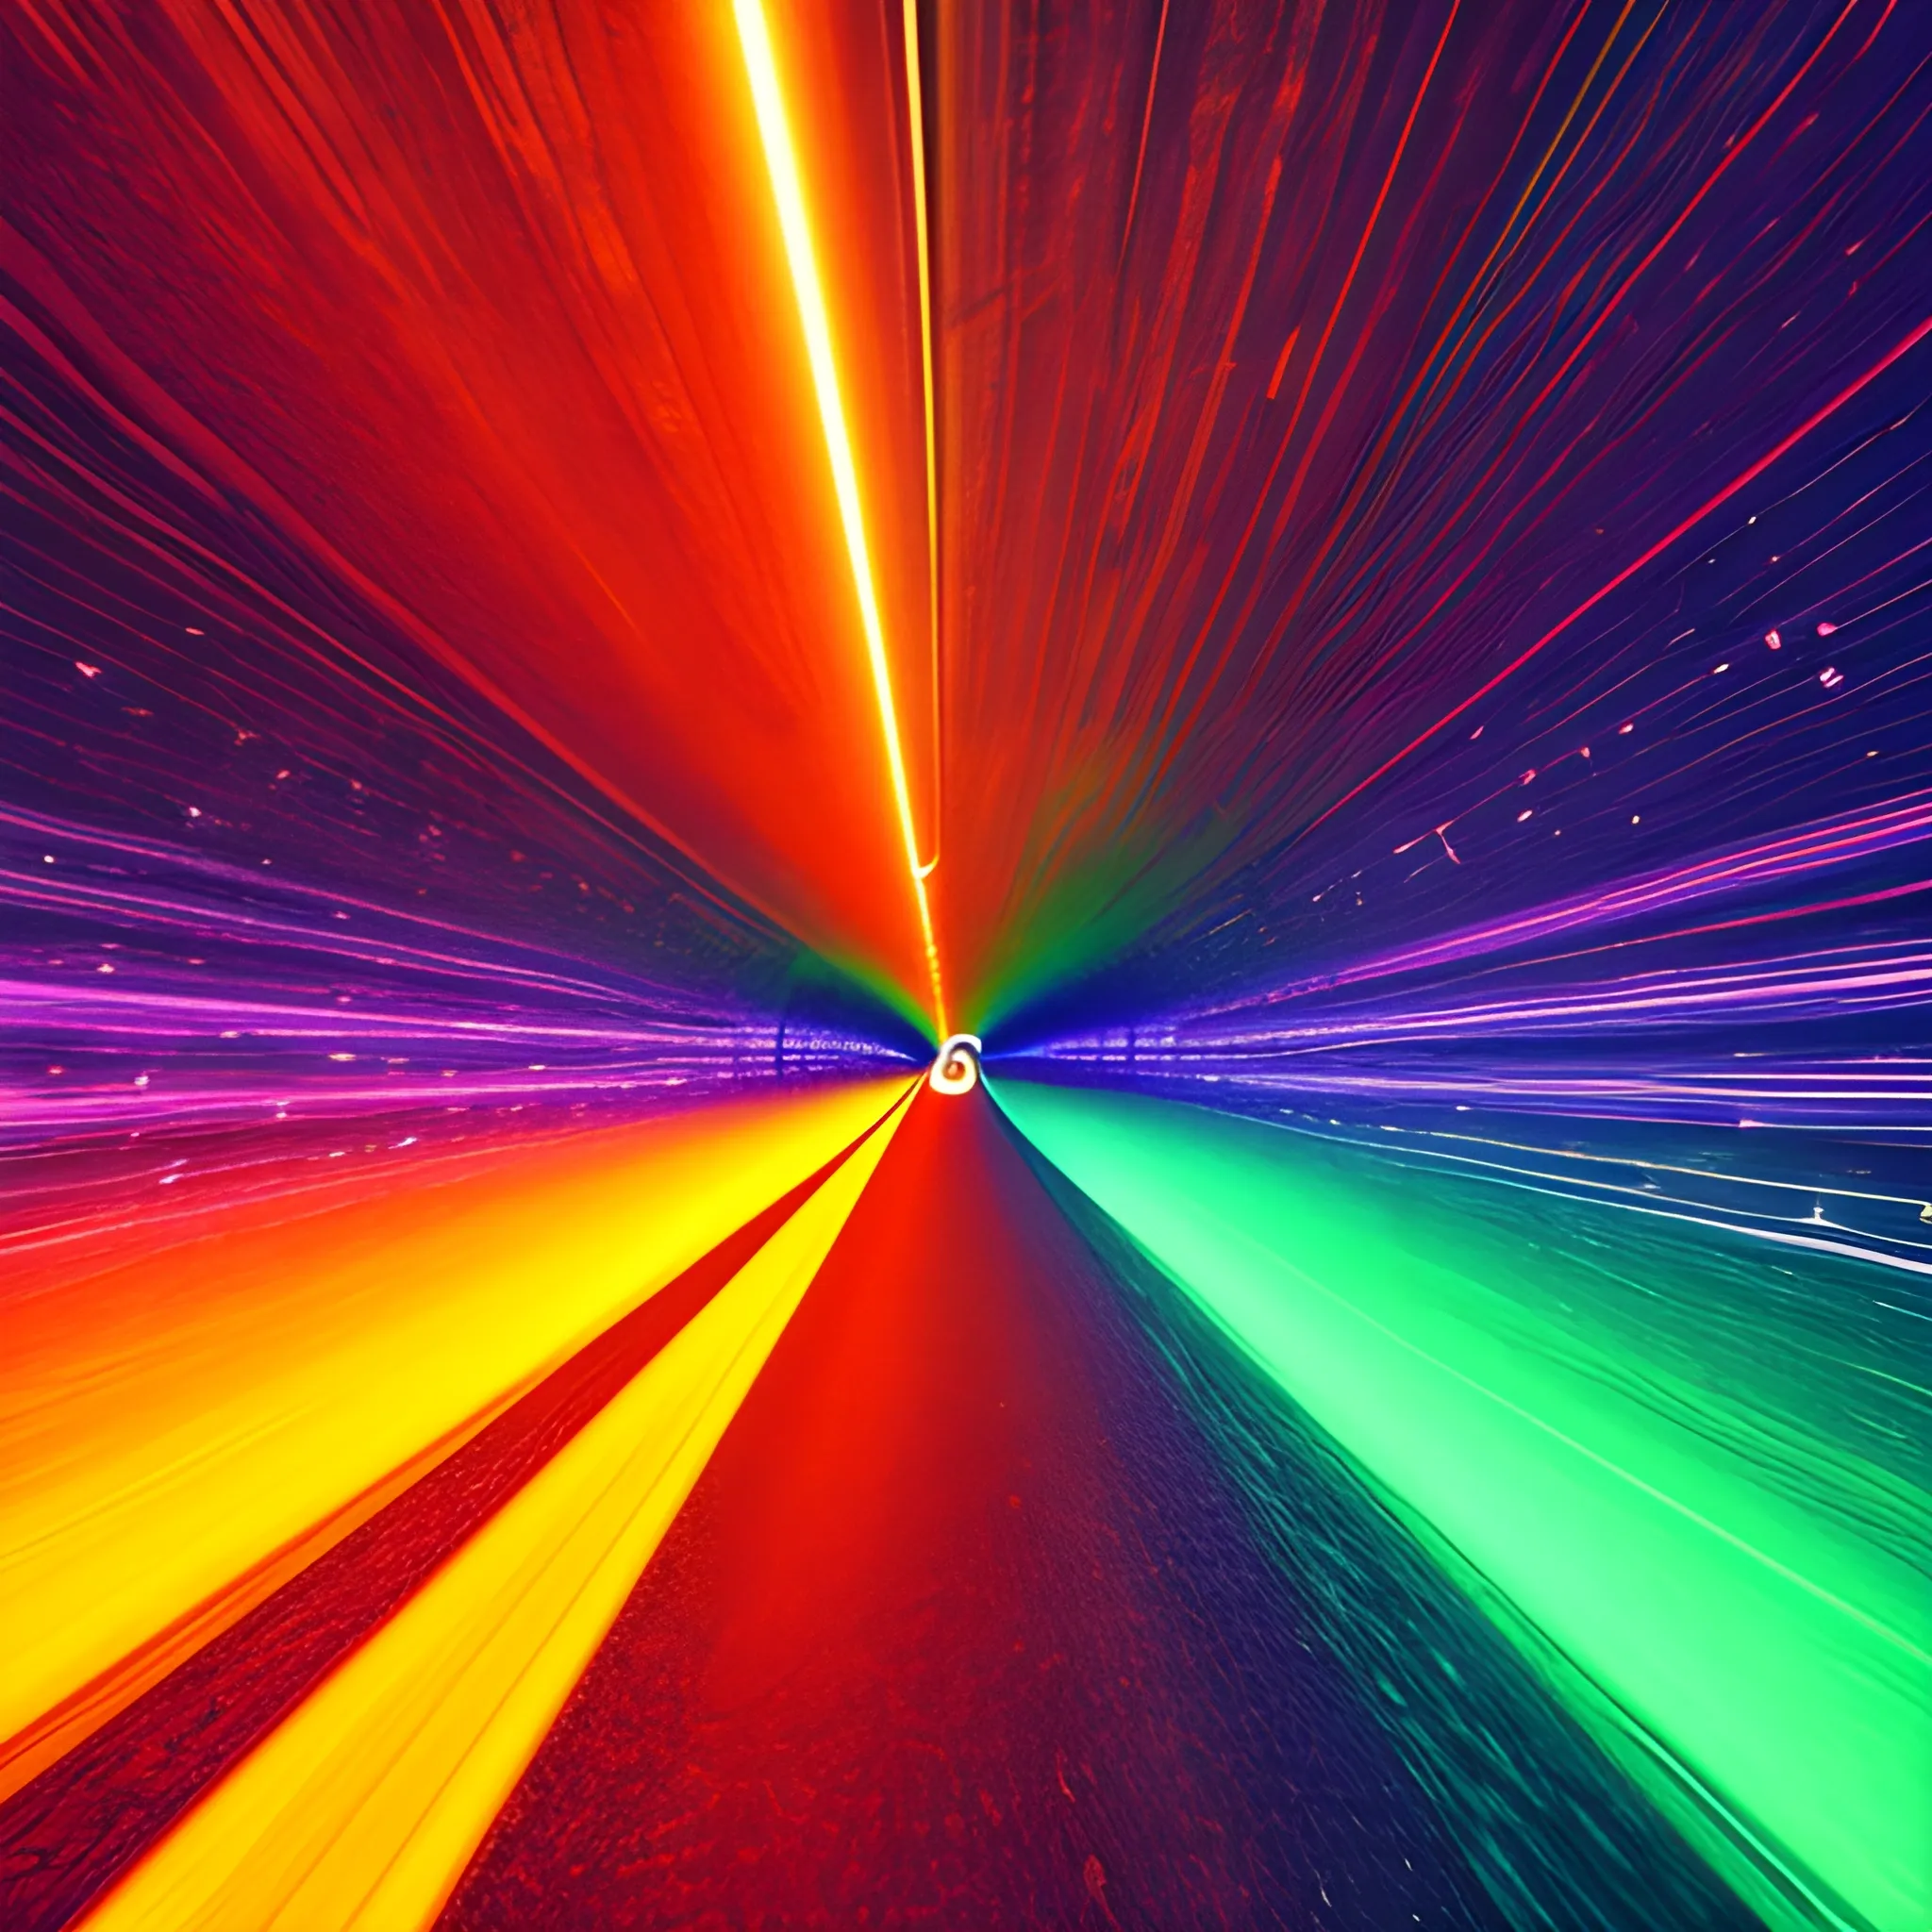 interior vision of a tunnel, very colorful psychedelic stroboscopic, spinning on itself shooting towards the starry sky in the background